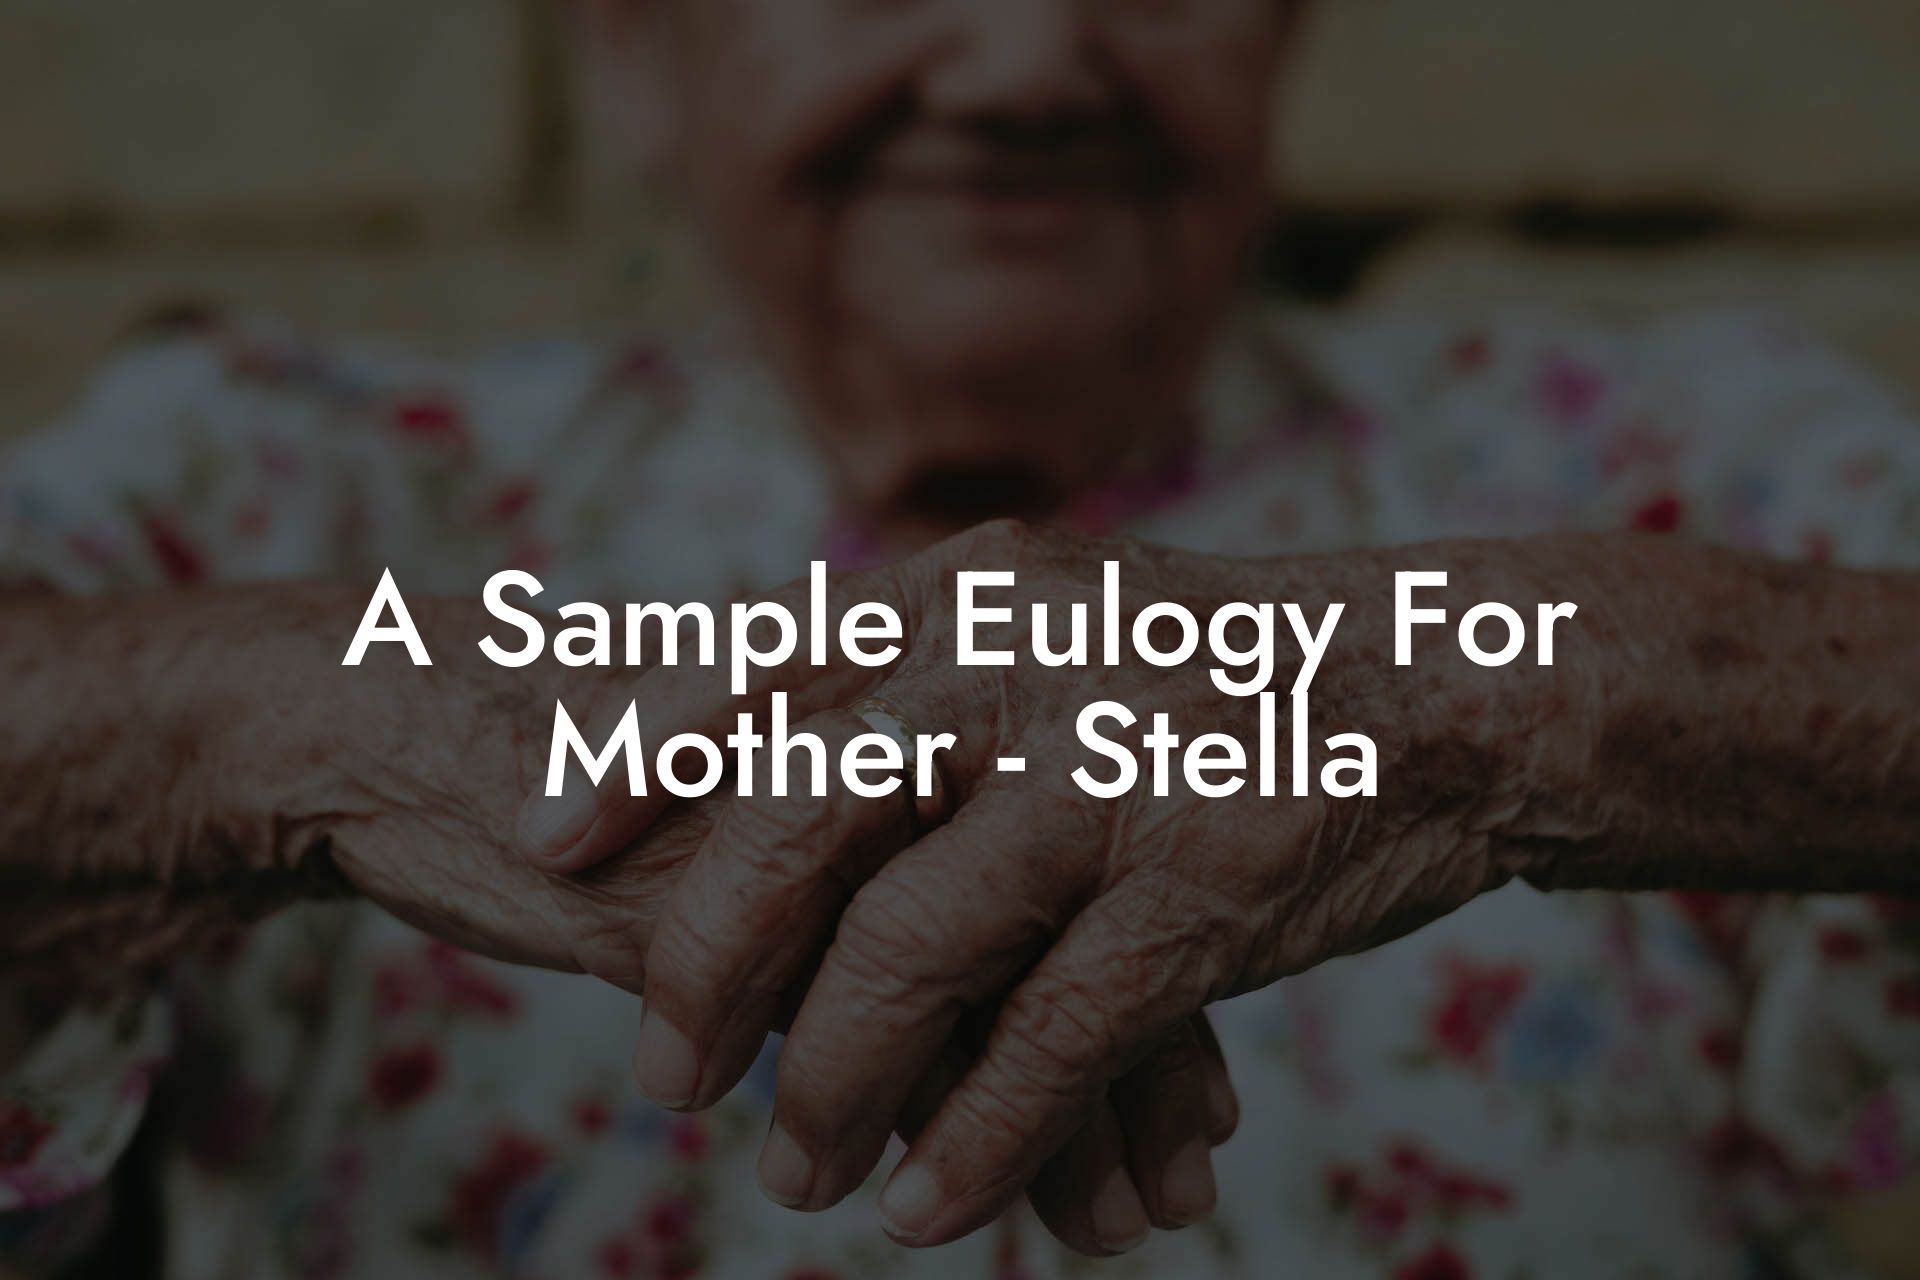 A Sample Eulogy For Mother - Stella